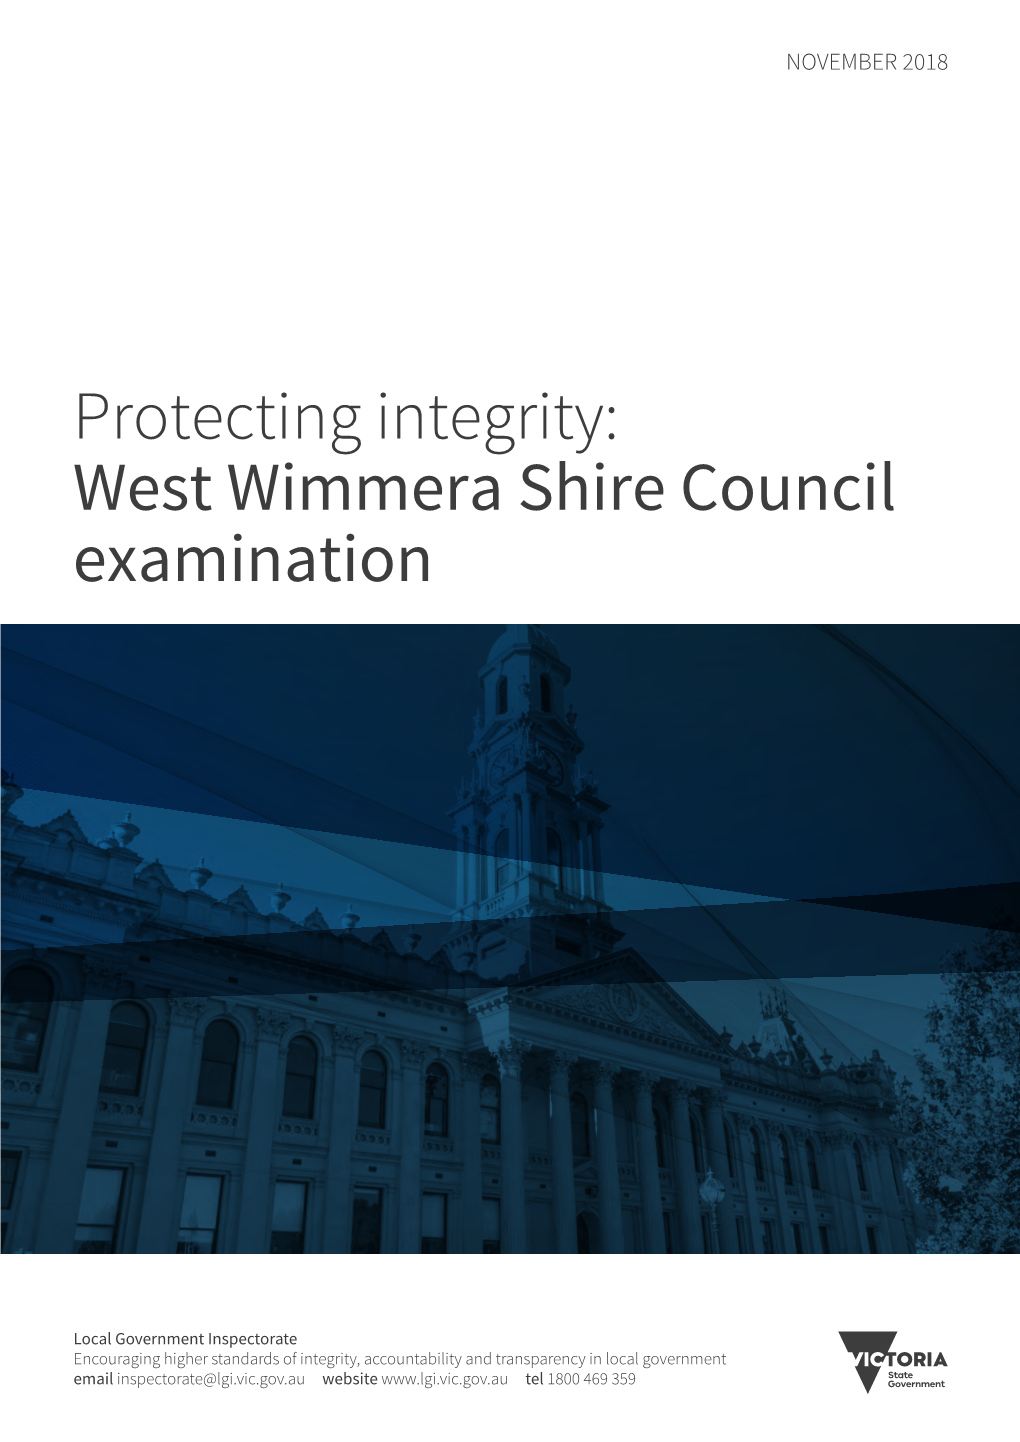 West Wimmera Shire Council Examination